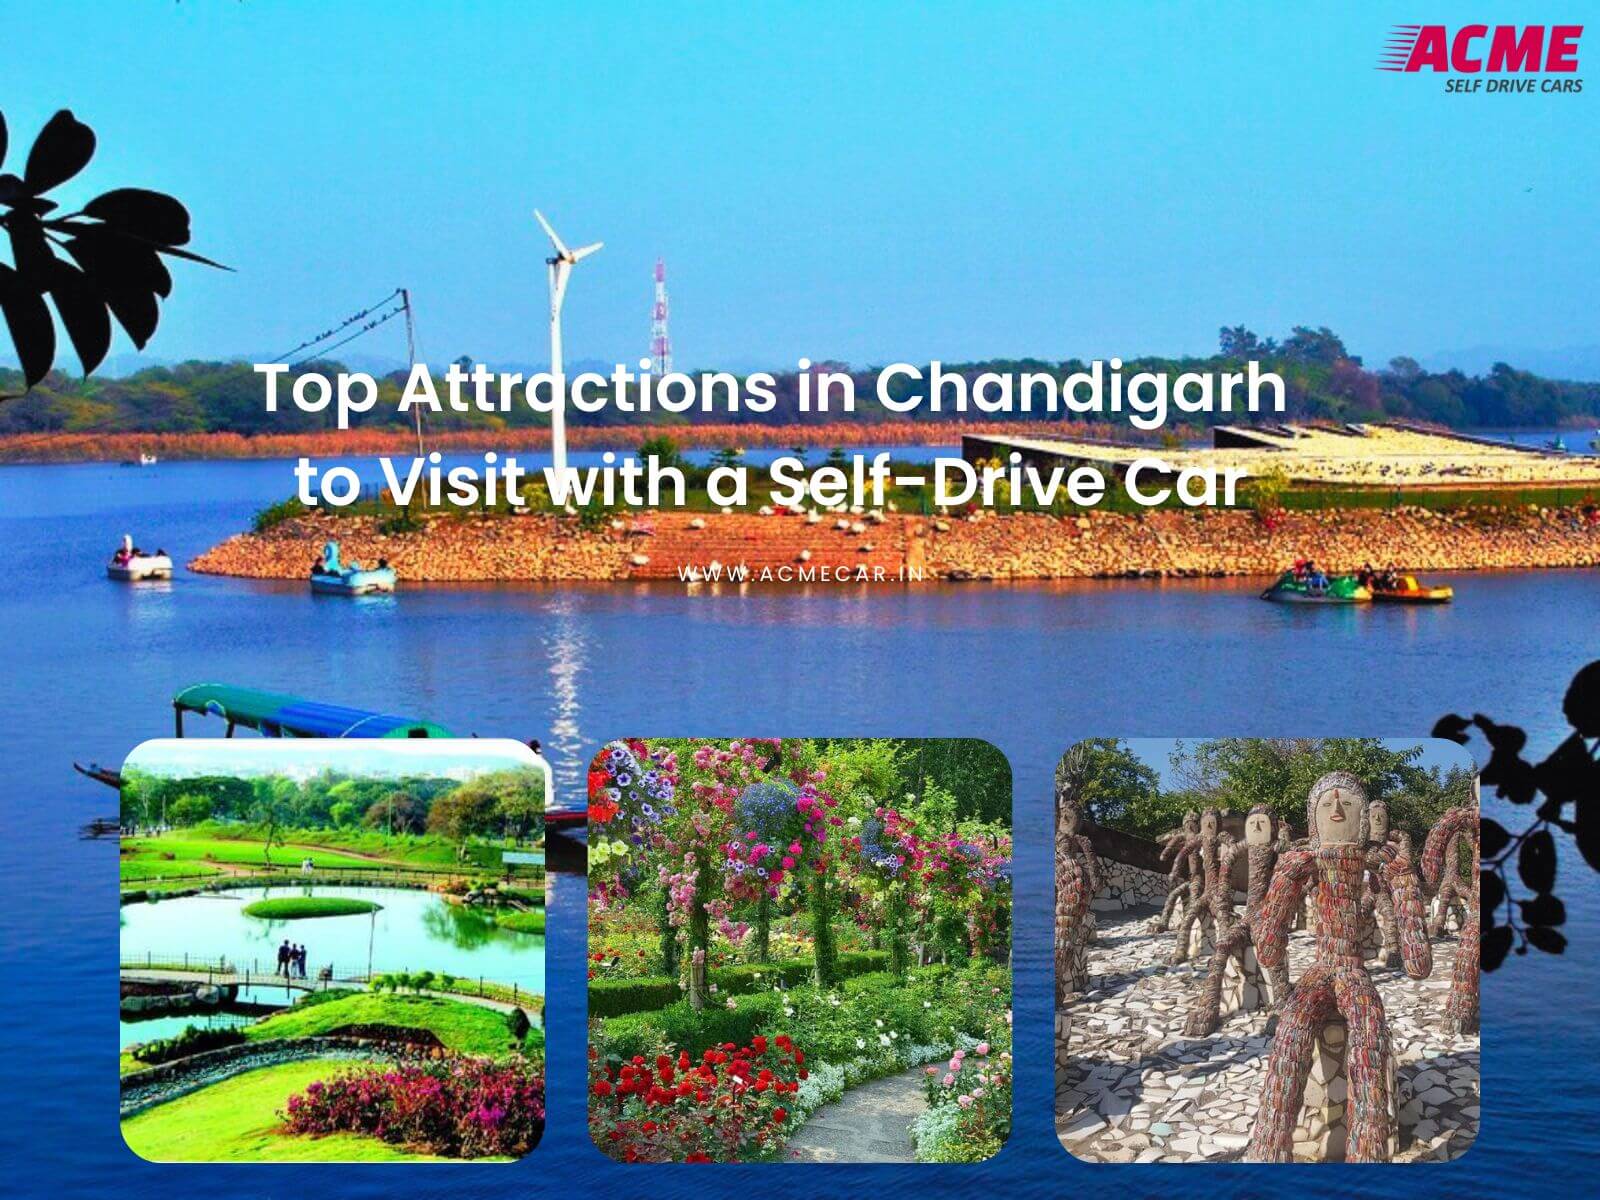 Top Attractions in Chandigarh to Visit with a Self-Drive Car